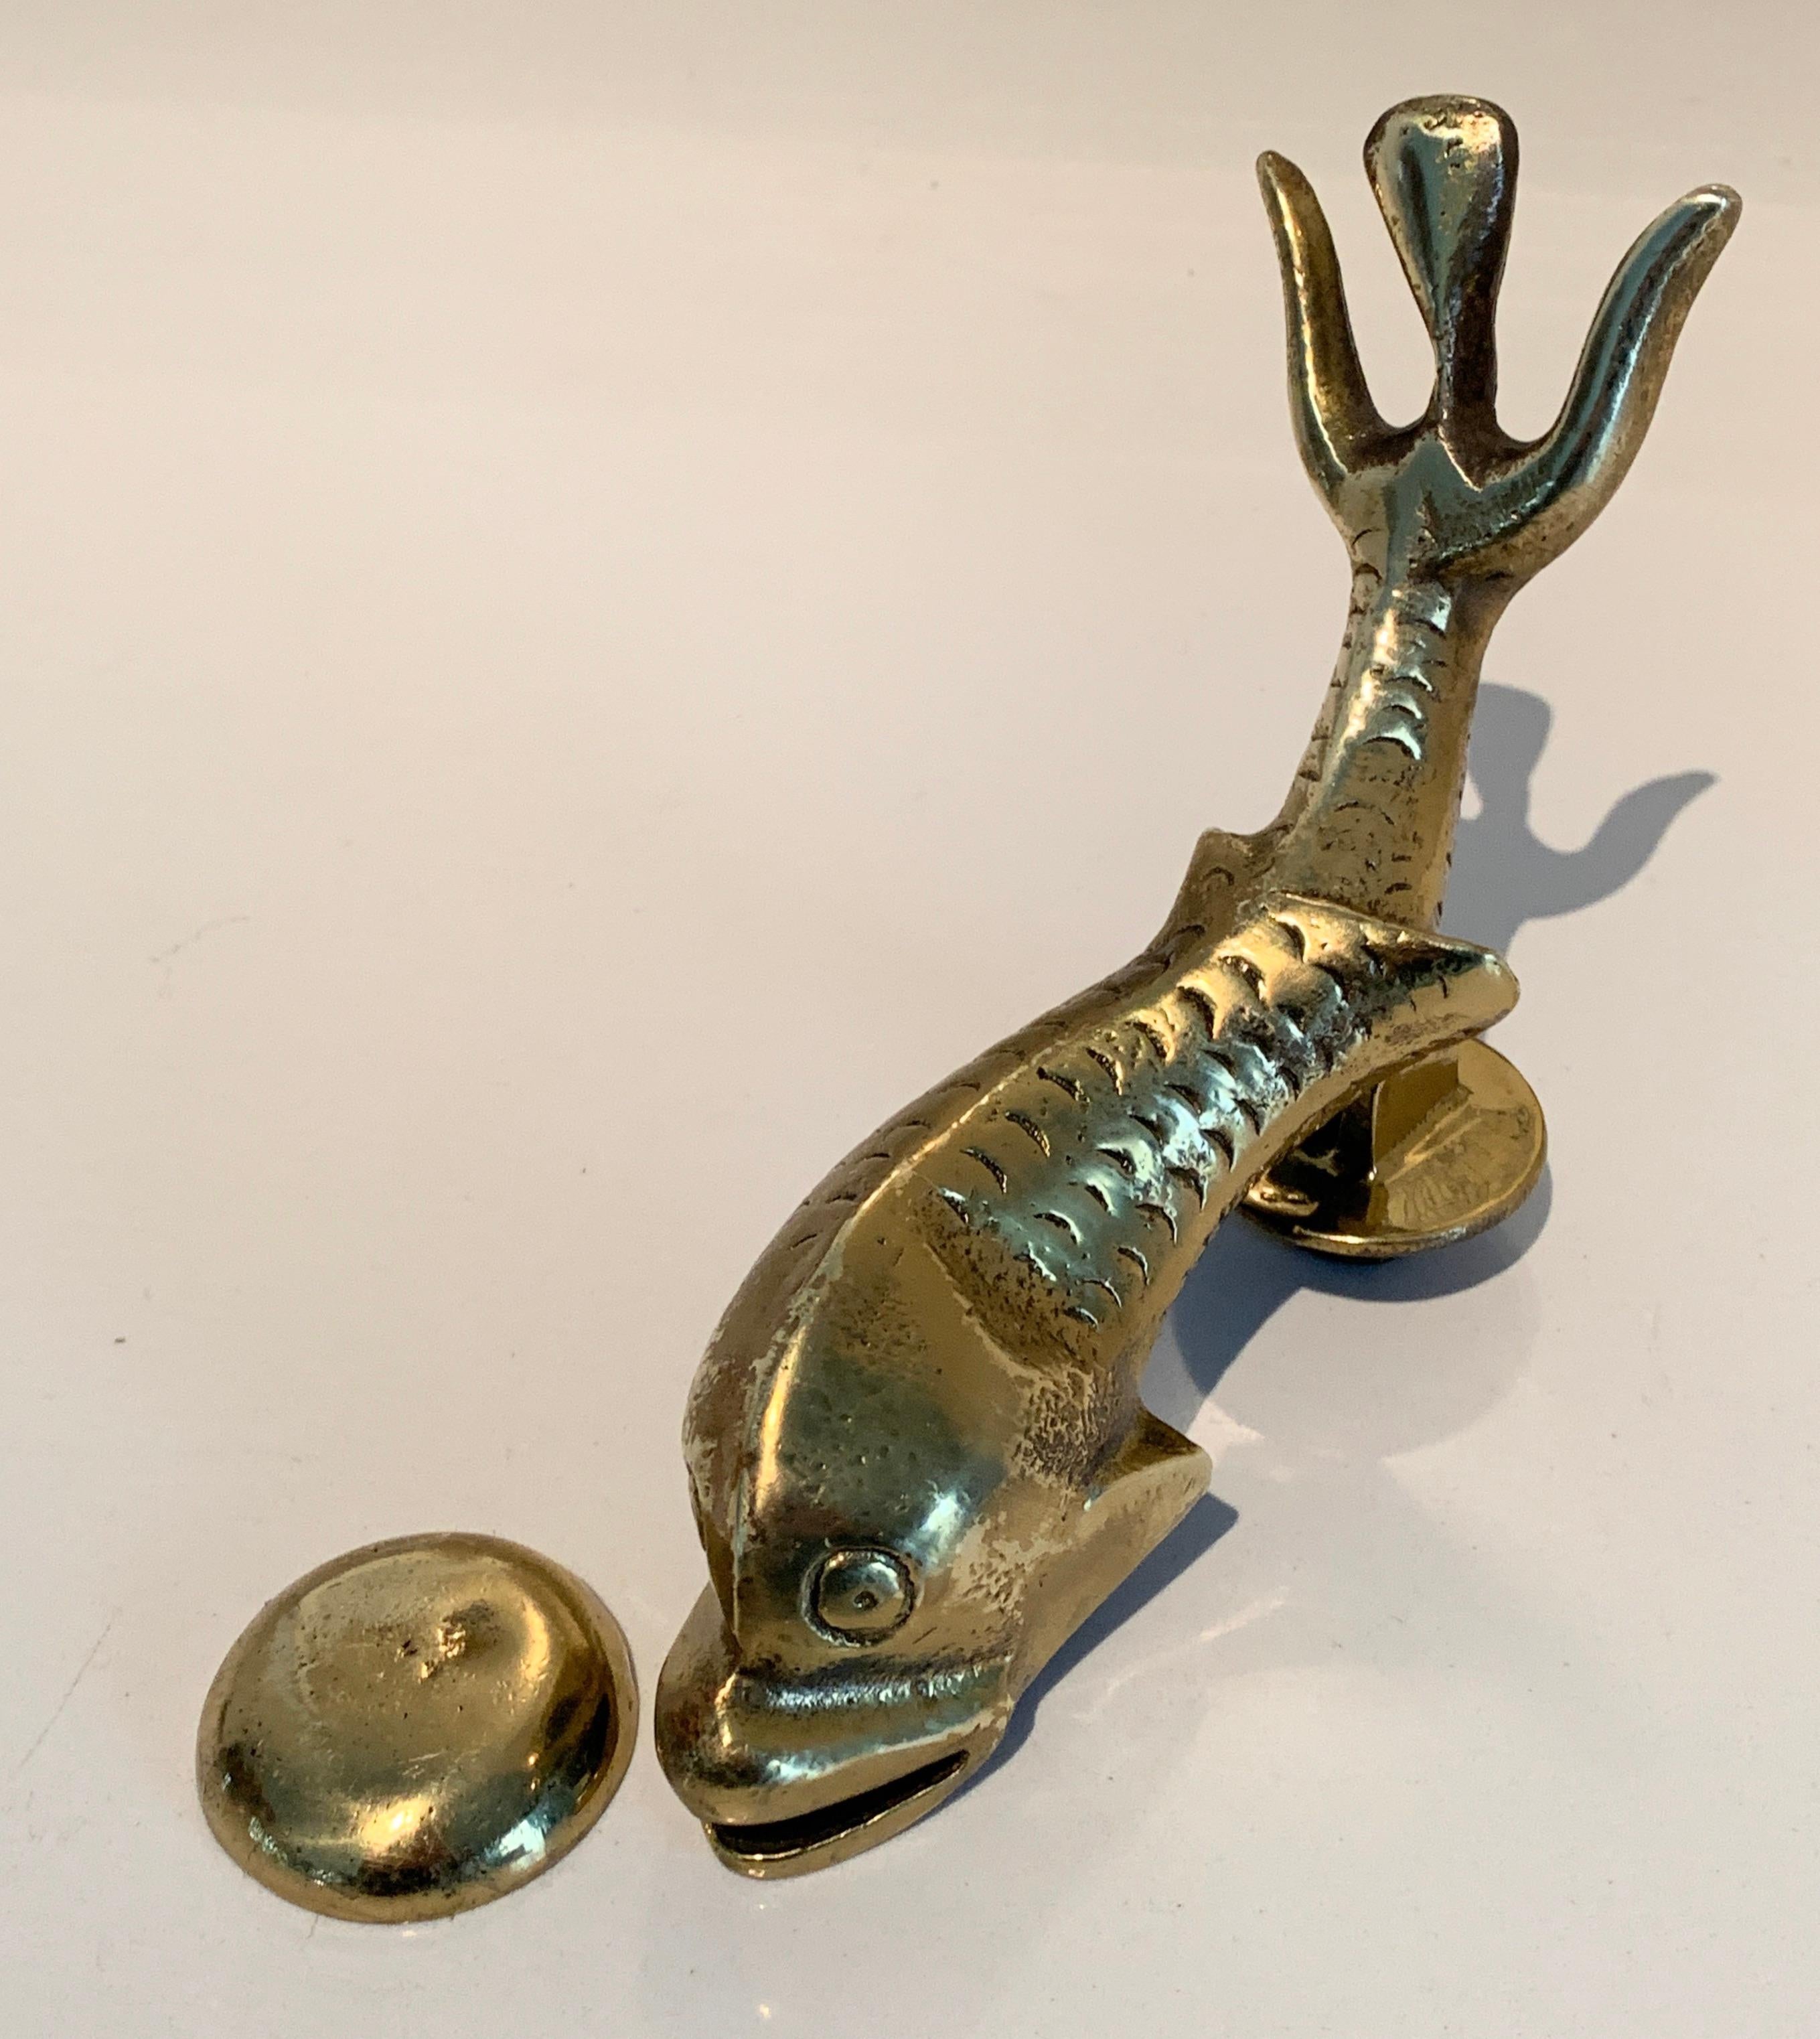 Large brass dolphin fish door knocker a wonderful curation fish with carved detailing, the piece has a round strike piece to knock with. A great midcentury piece, we have included Brass screws that may work with most doors.